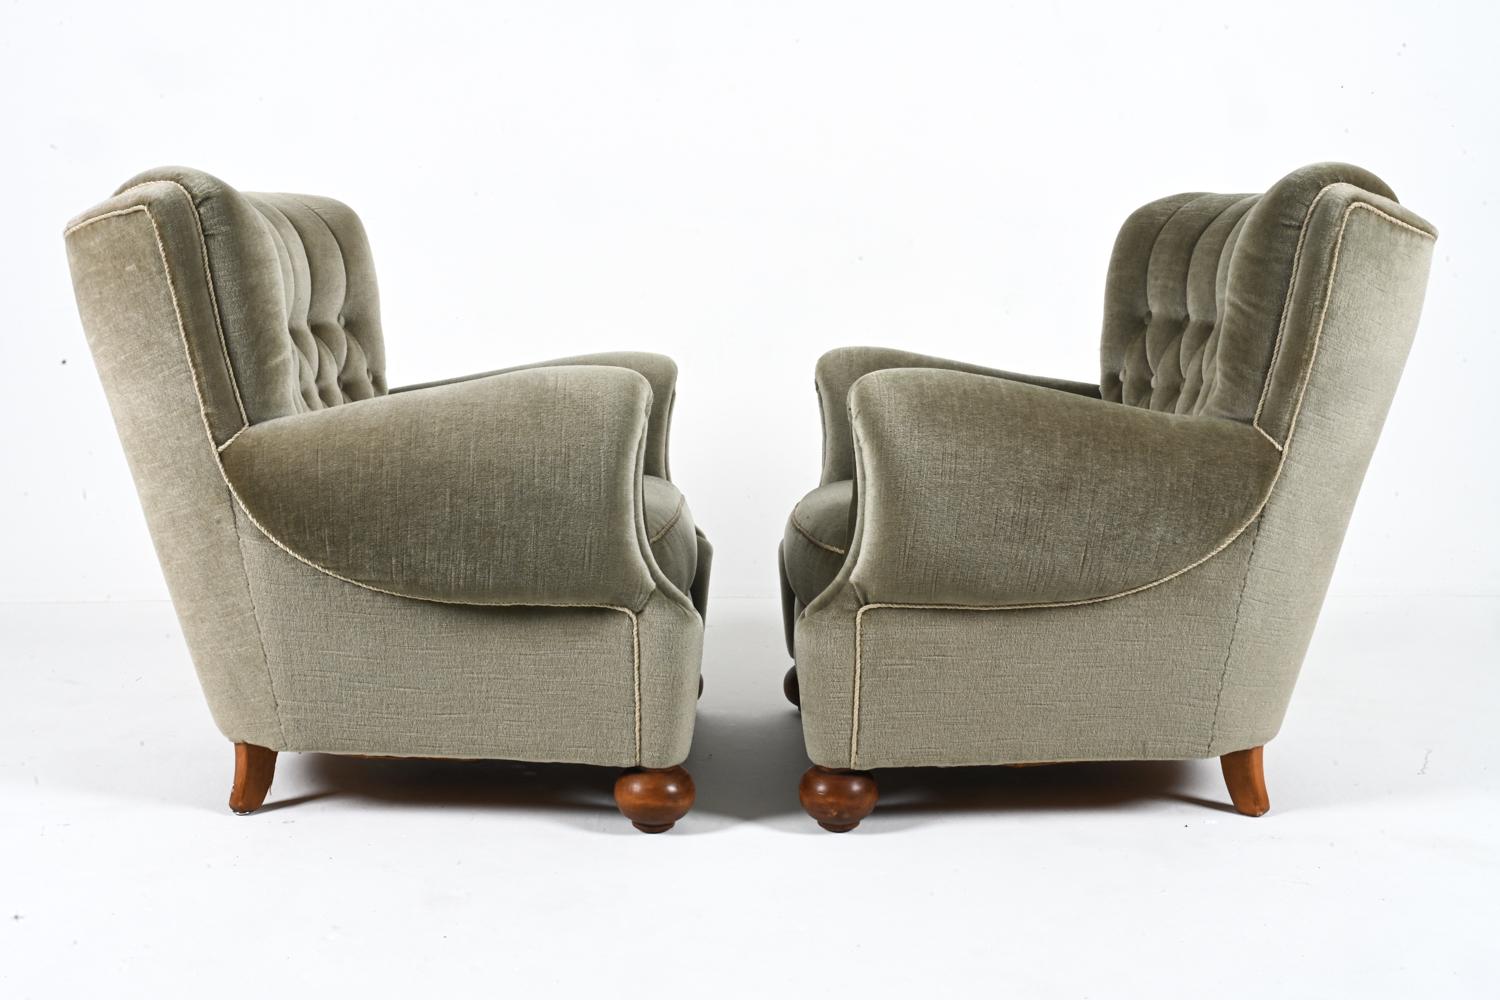 Pair of European Roll-Arm Club Chairs in Mohair and Beech, c. 1940's For Sale 12